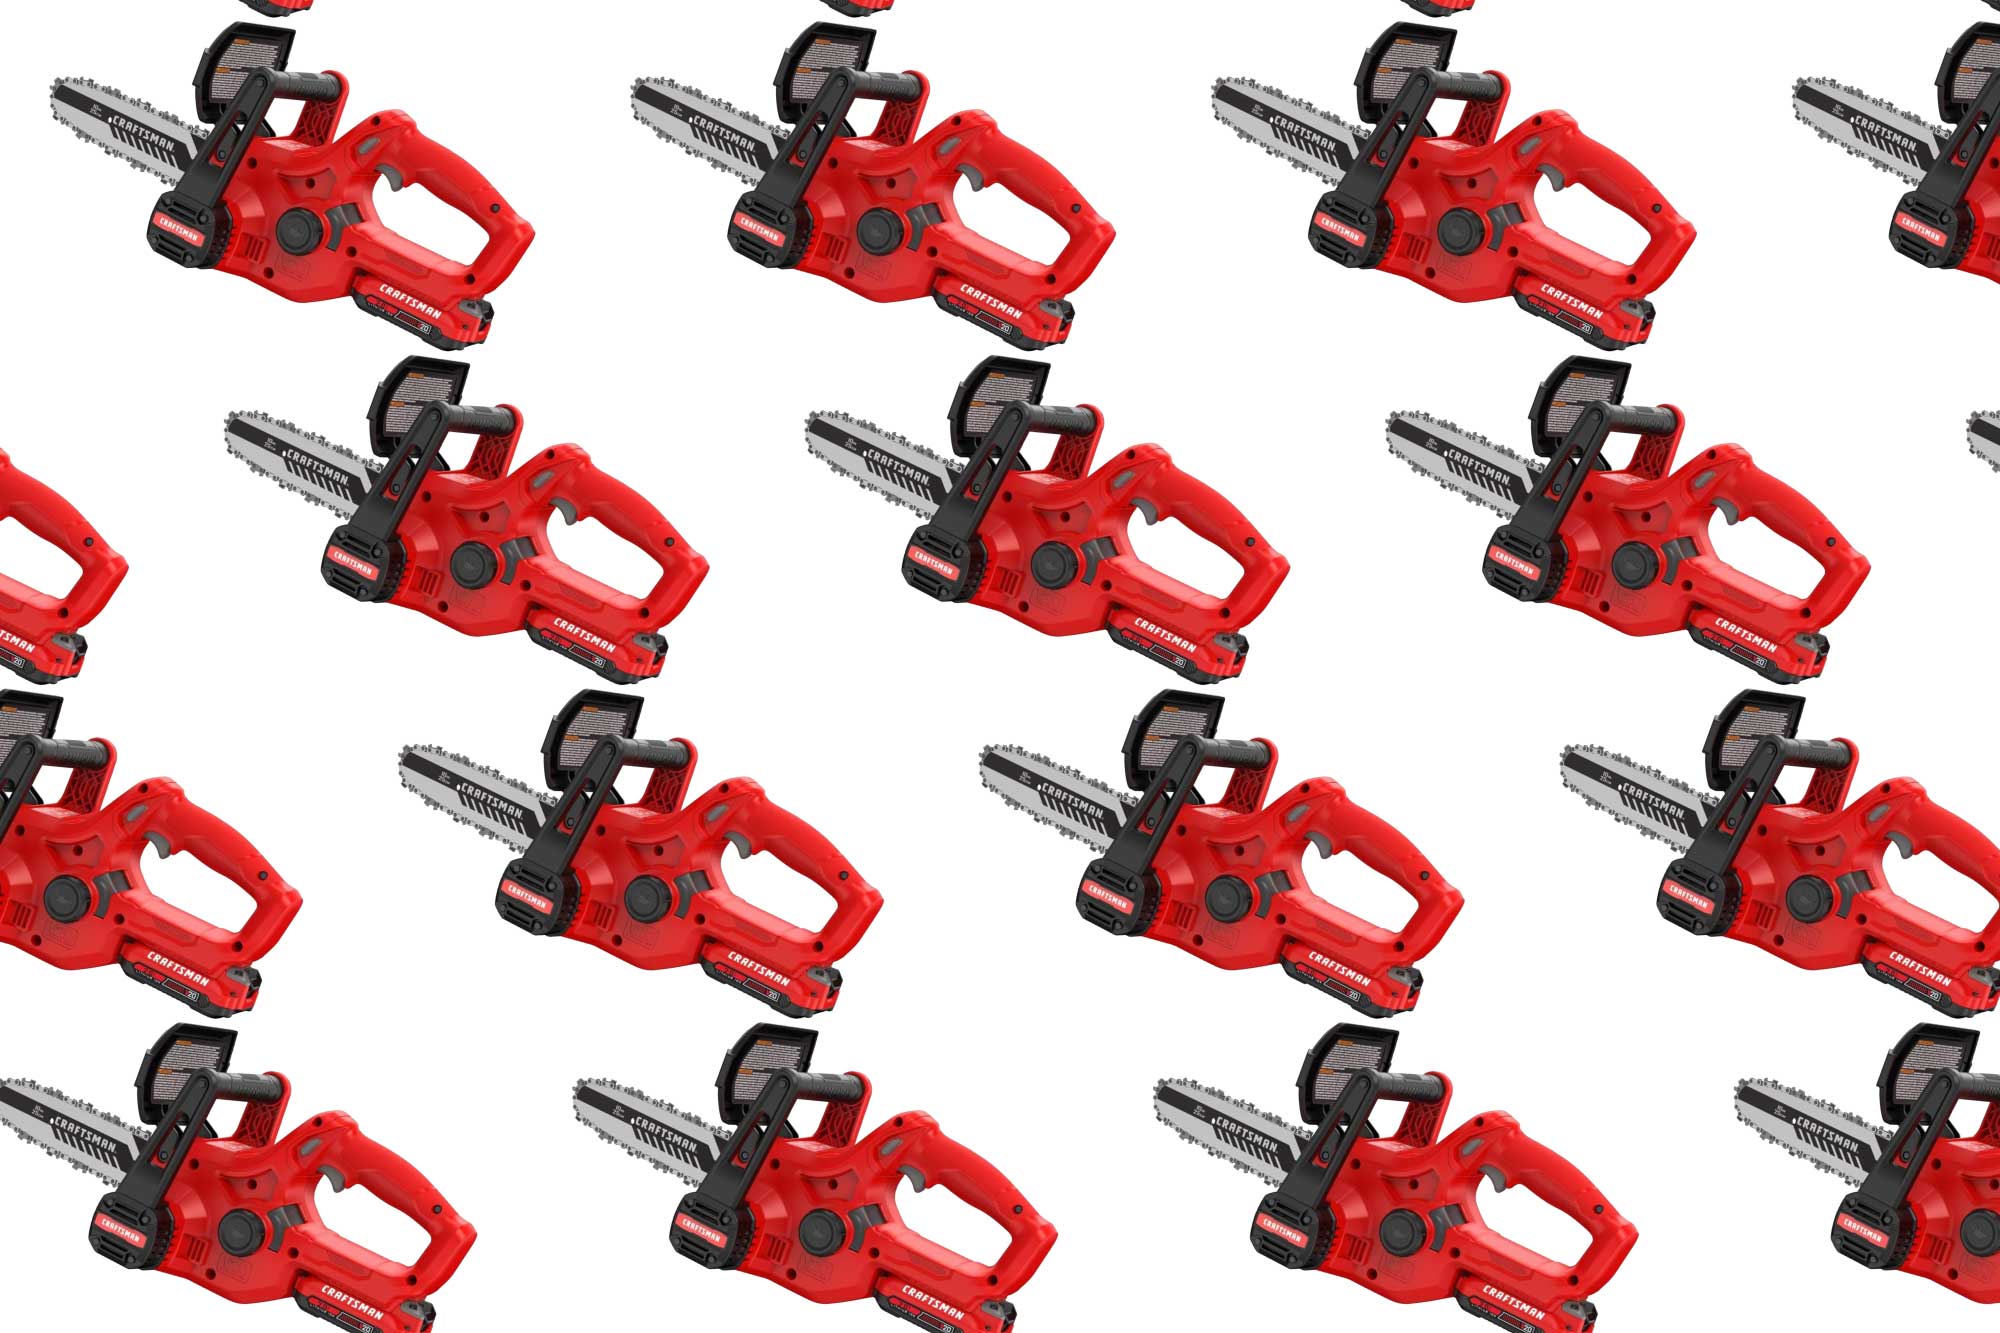 Tackle tiny trees with 30% off this mini Craftsman chainsaw at Amazon